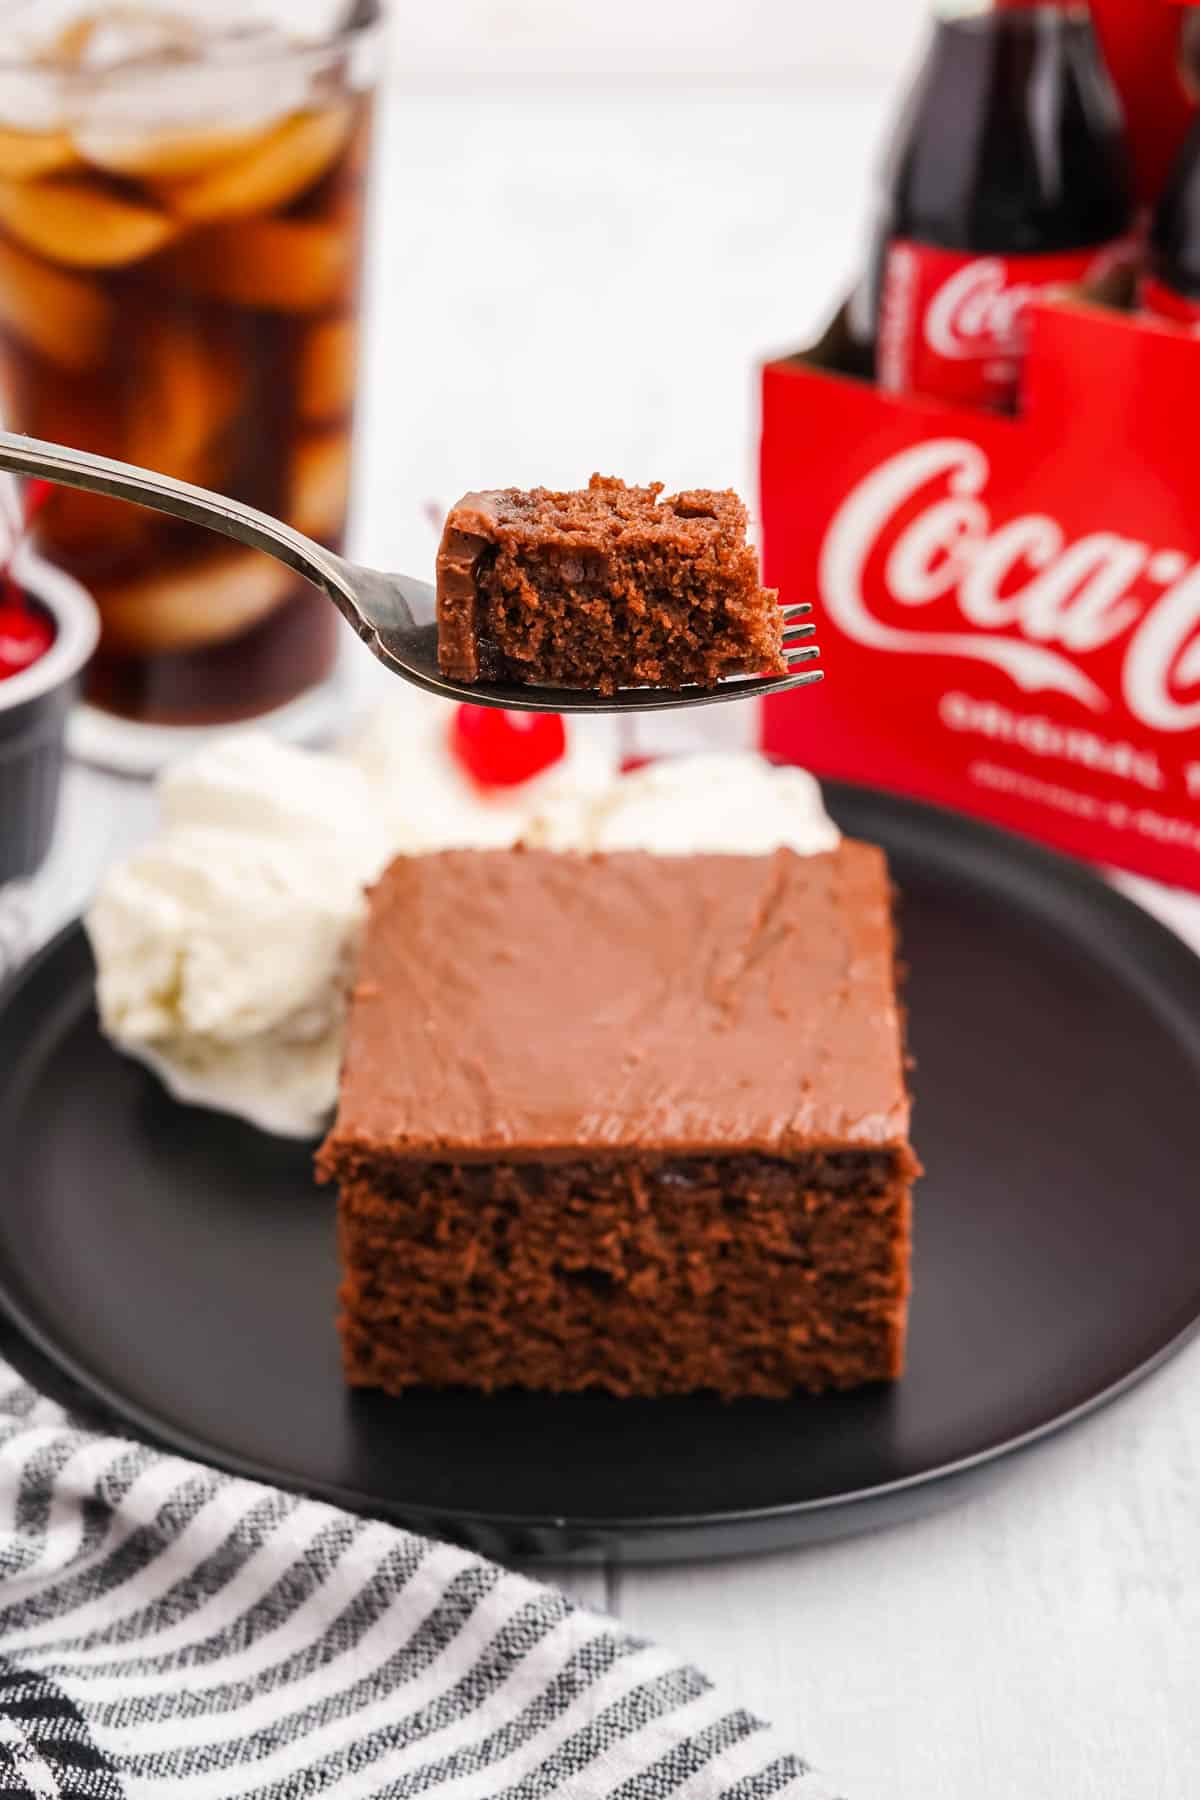 A fork lifting a bite of chocolate coca cola cake in front of a piece of cake.